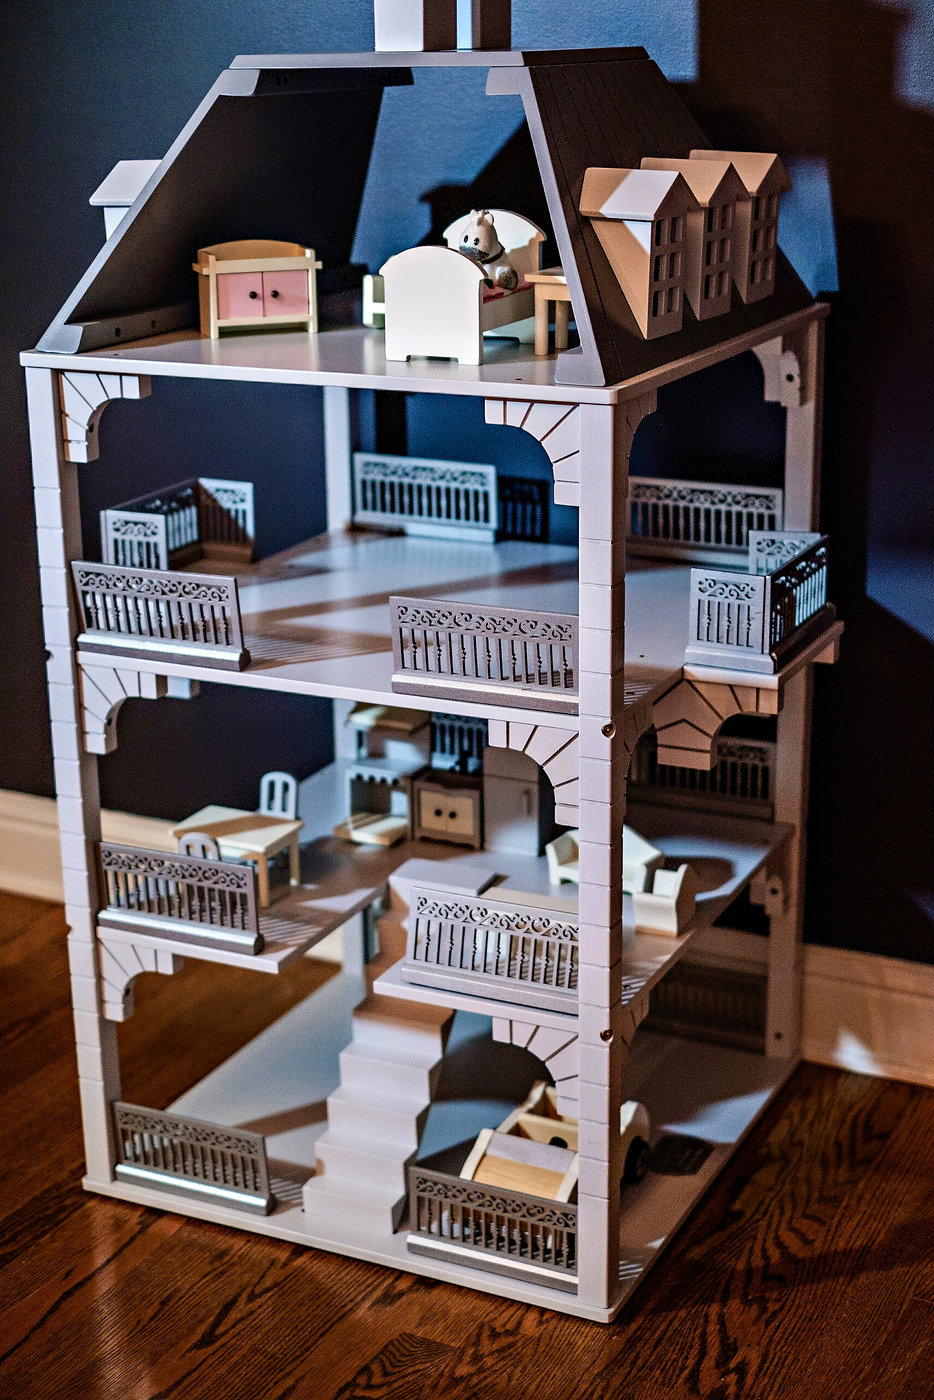 Doll House | Meg Basinger | Little Girl Room Decor featured by popular Atlanta life and style blogger Happily Hughes